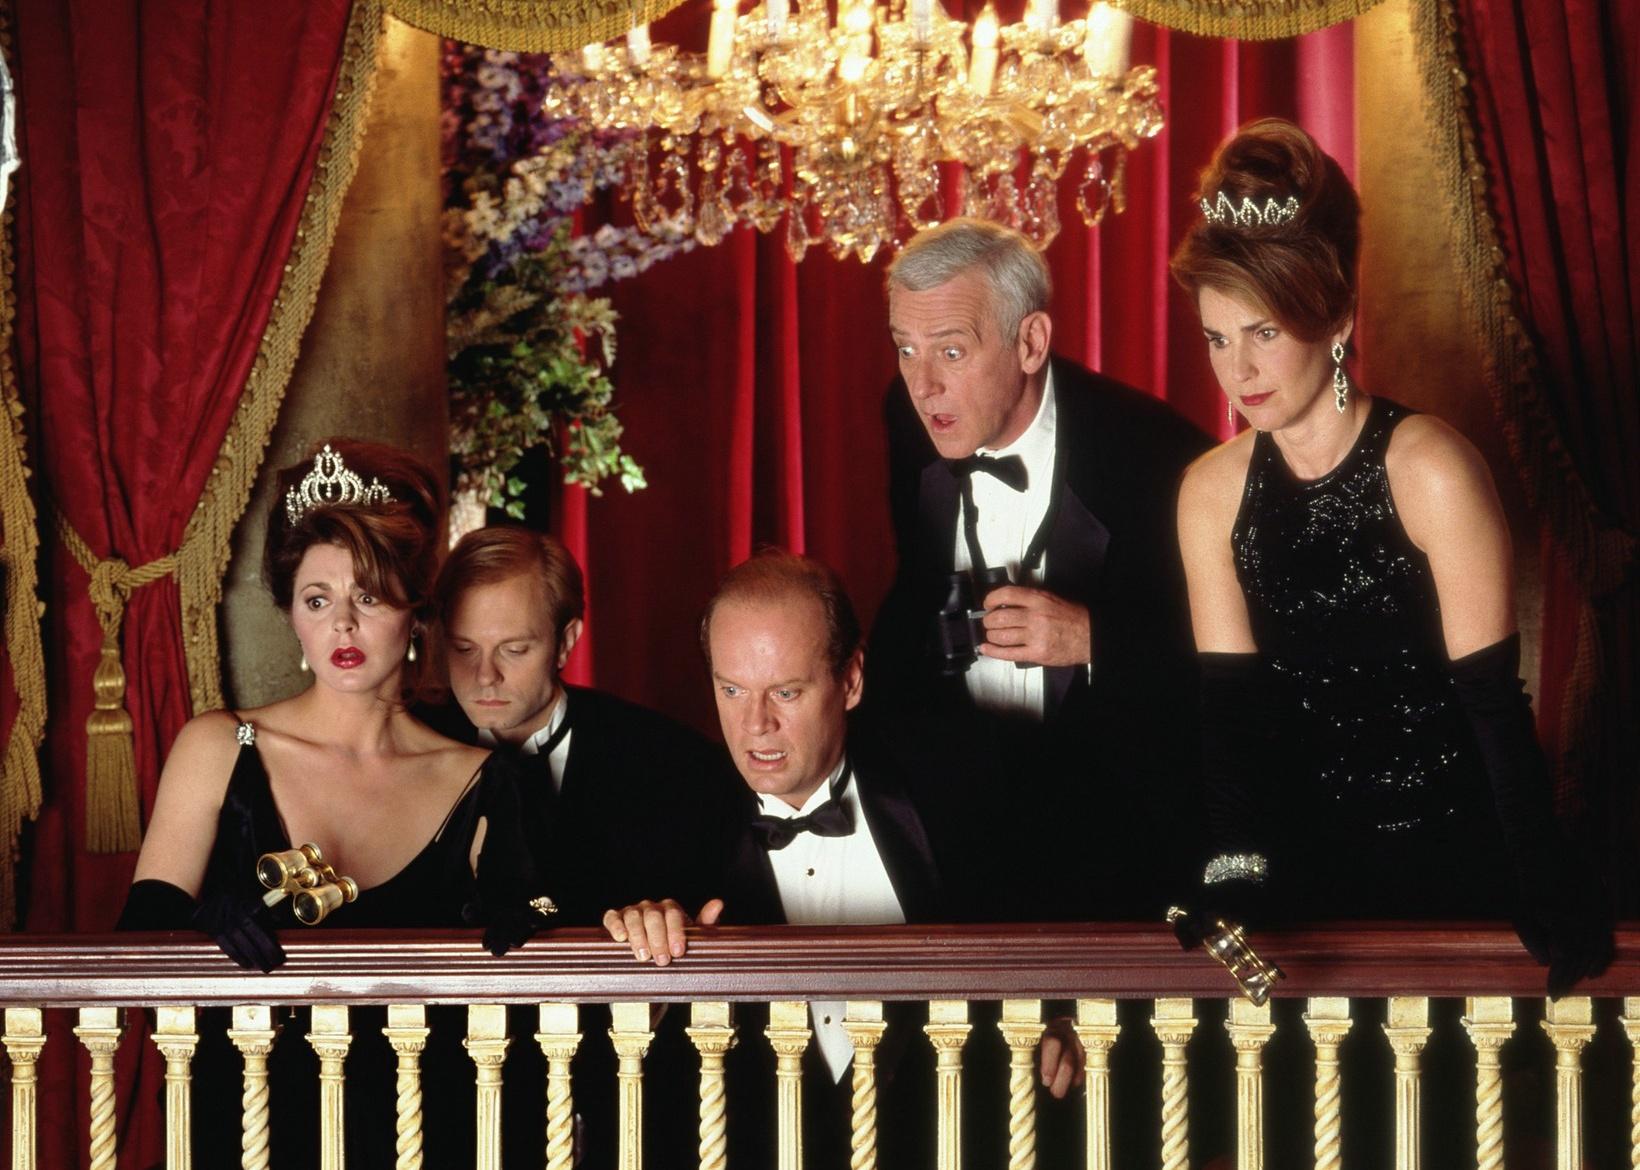 The cast of Frasier on an opera balcony looking down at the stage.